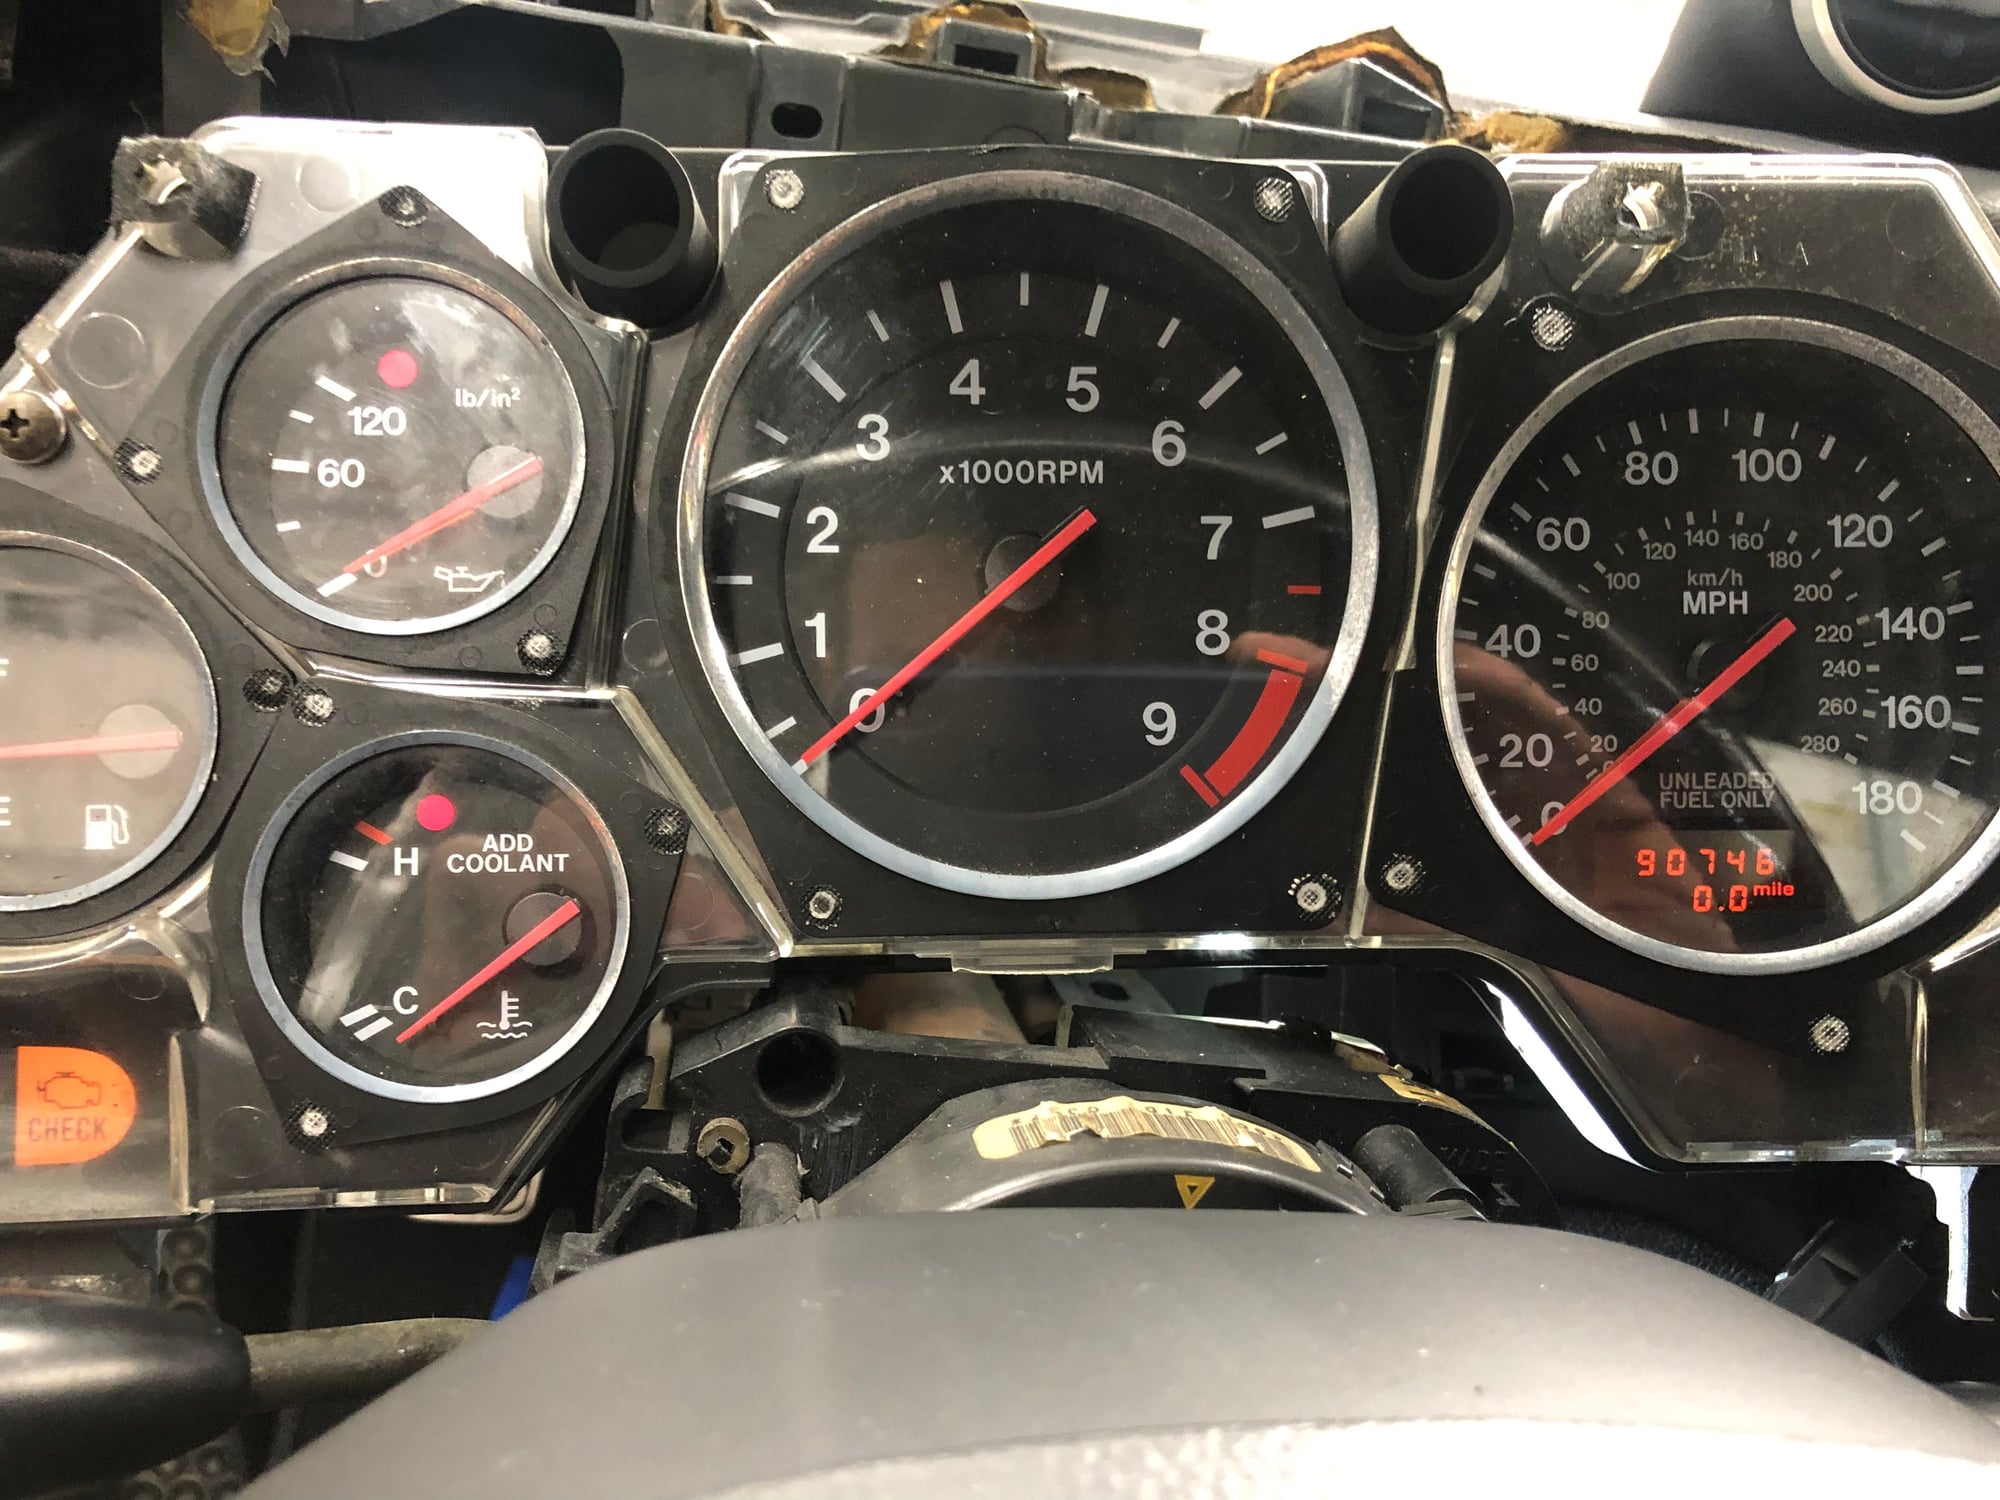 Accessories - LHD Gauge Cluster + Misc Parts - Used - 1993 to 1995 Mazda RX-7 - San Diego, CA 92109, United States